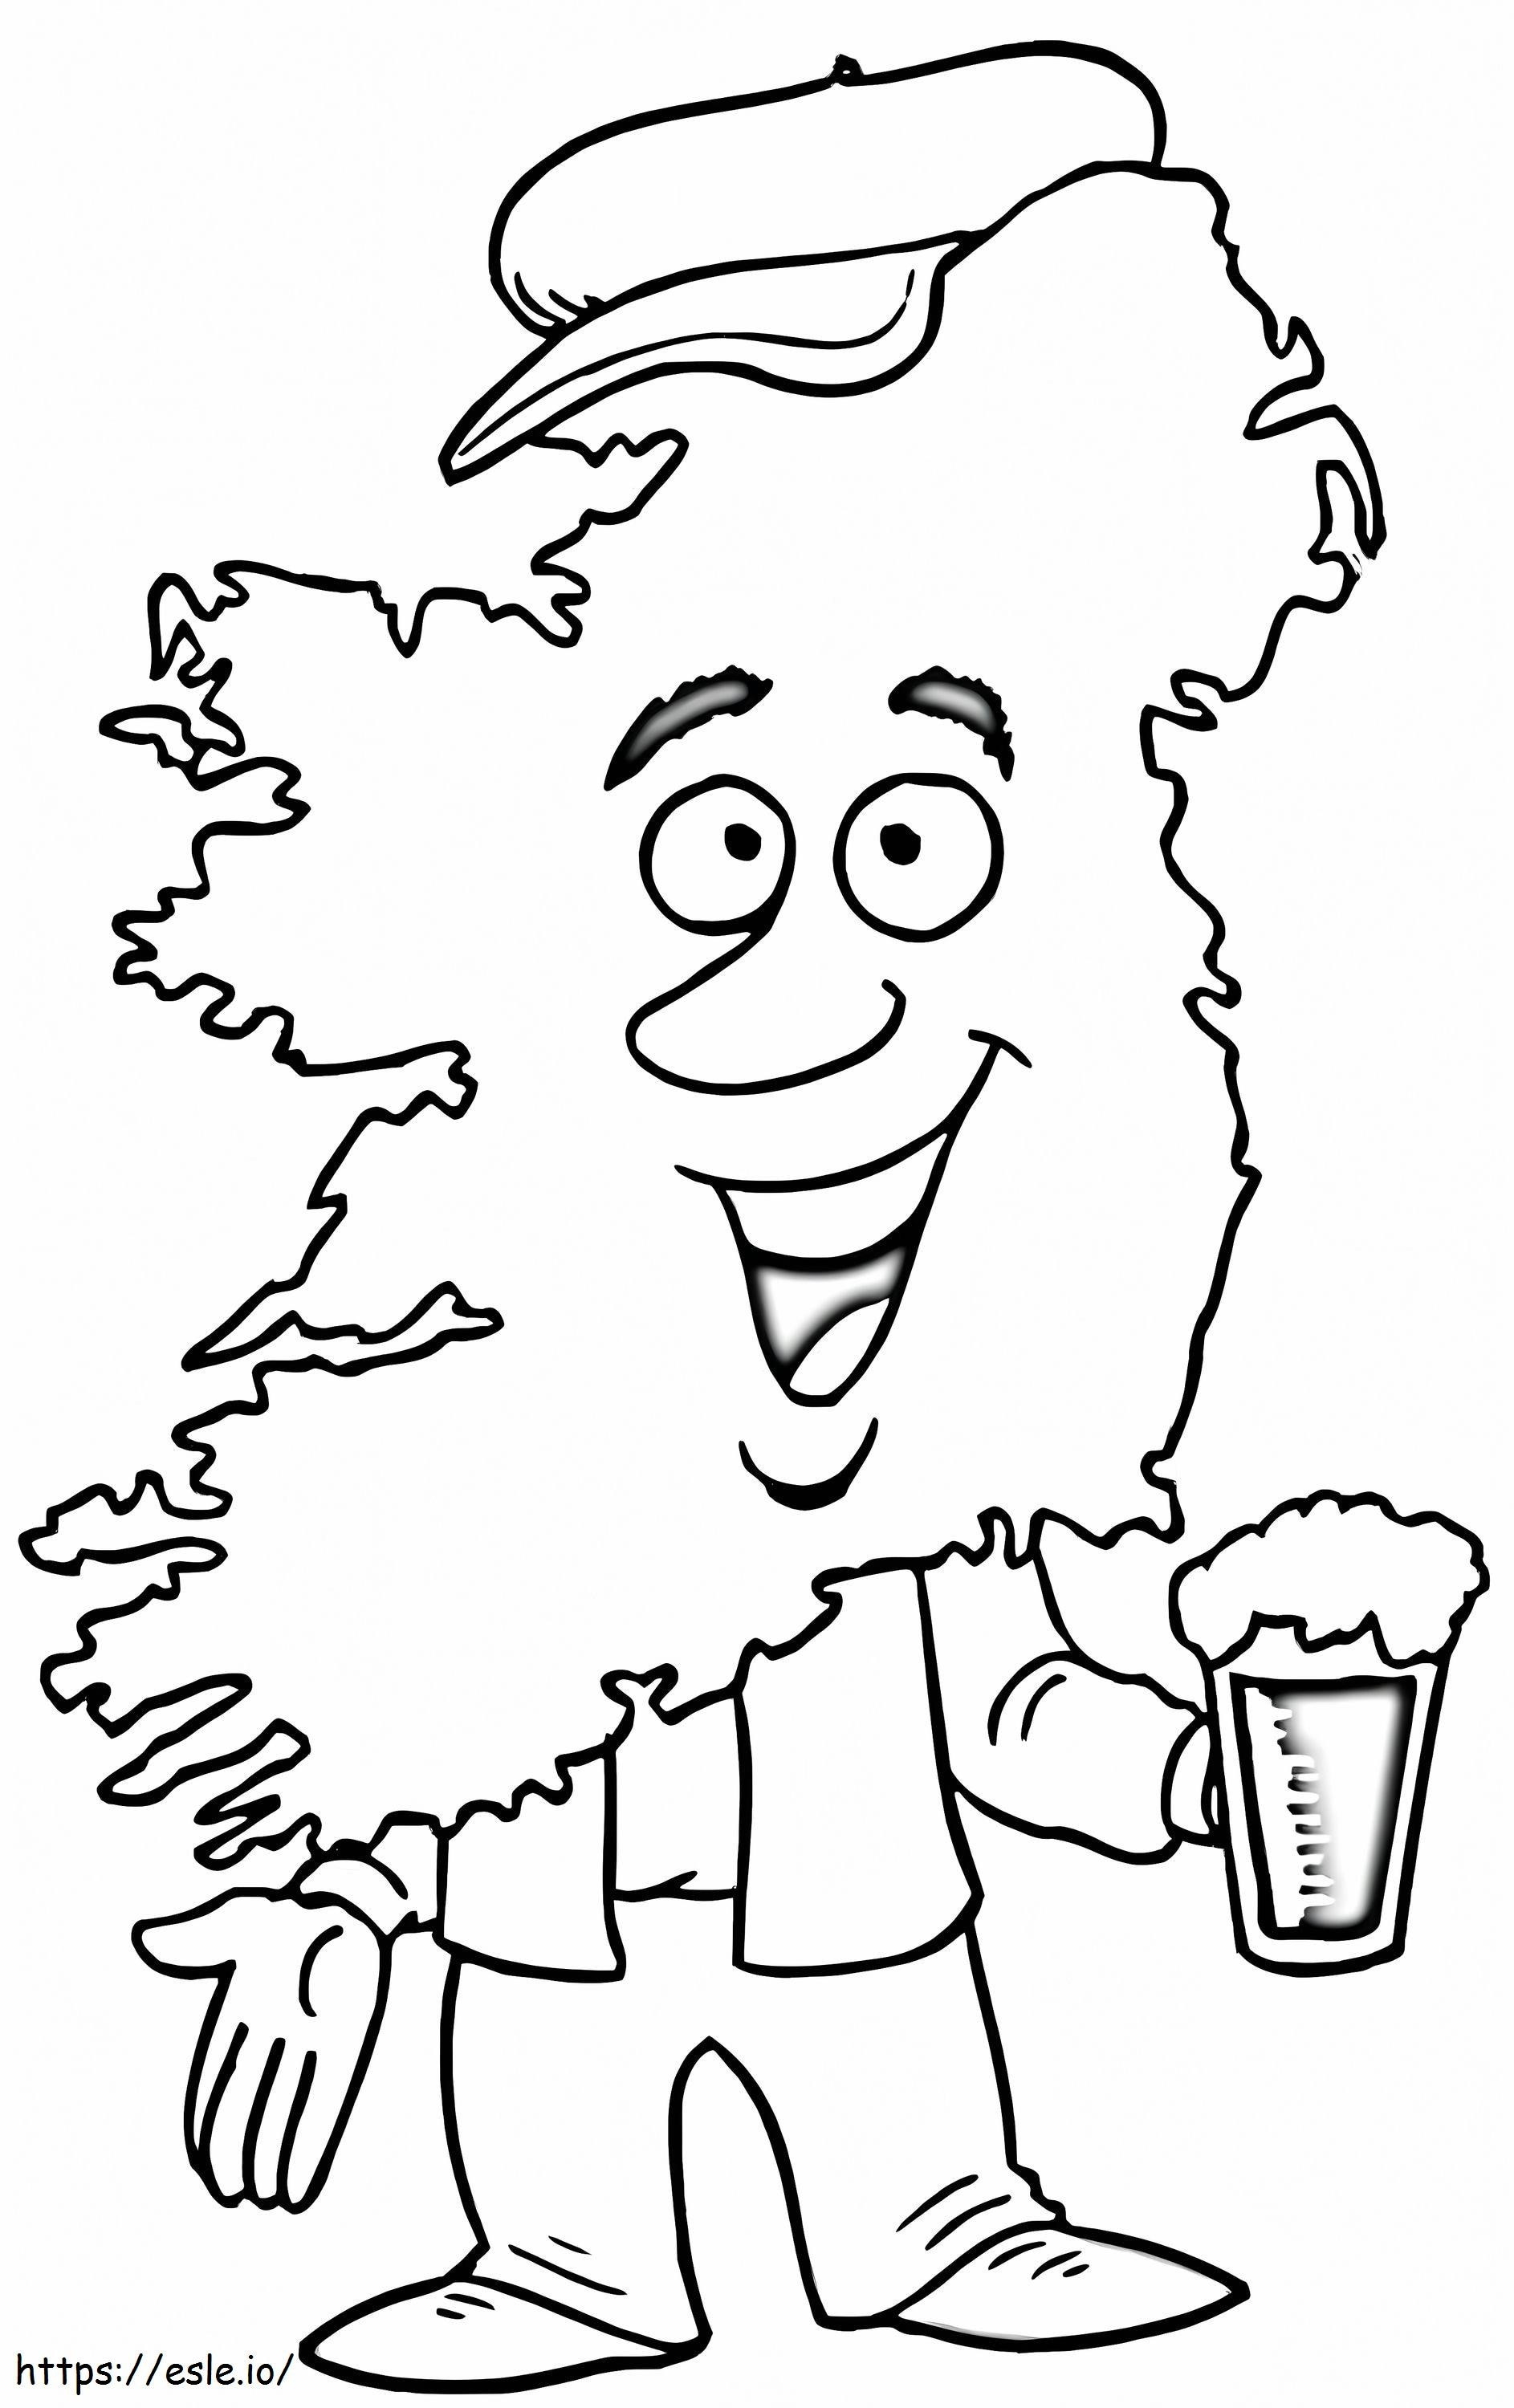 Map Of Ireland Man coloring page